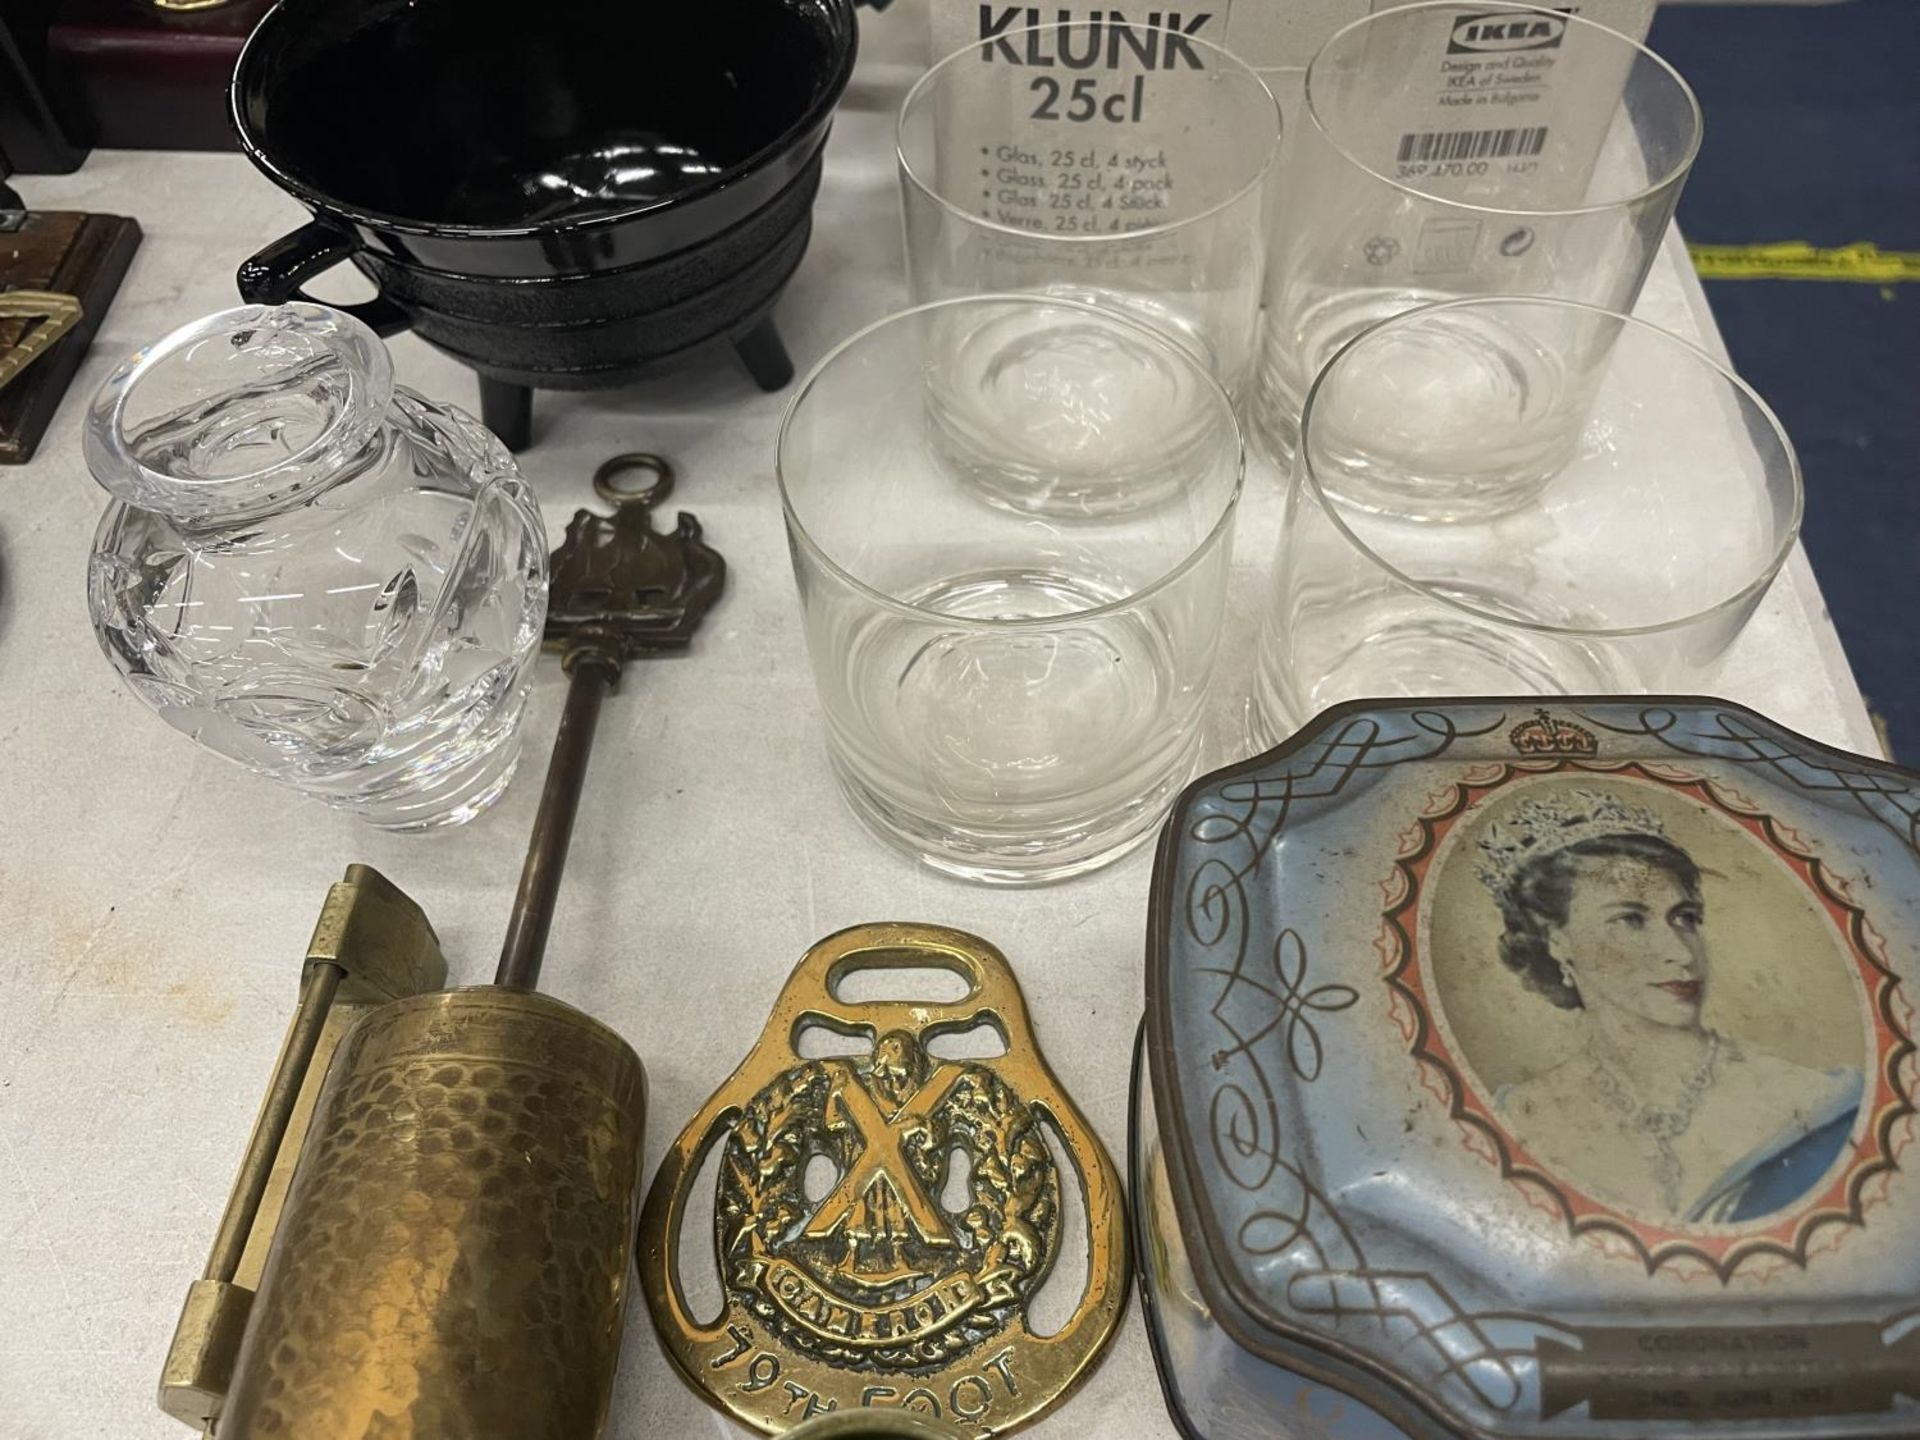 A MIXED LOT TO INCLUDE A VINTAGE RAZOR, TUMBLER GLASSES, BLACK GLASS BOWLS, BRASS ITEMS, ETC - Image 3 of 4